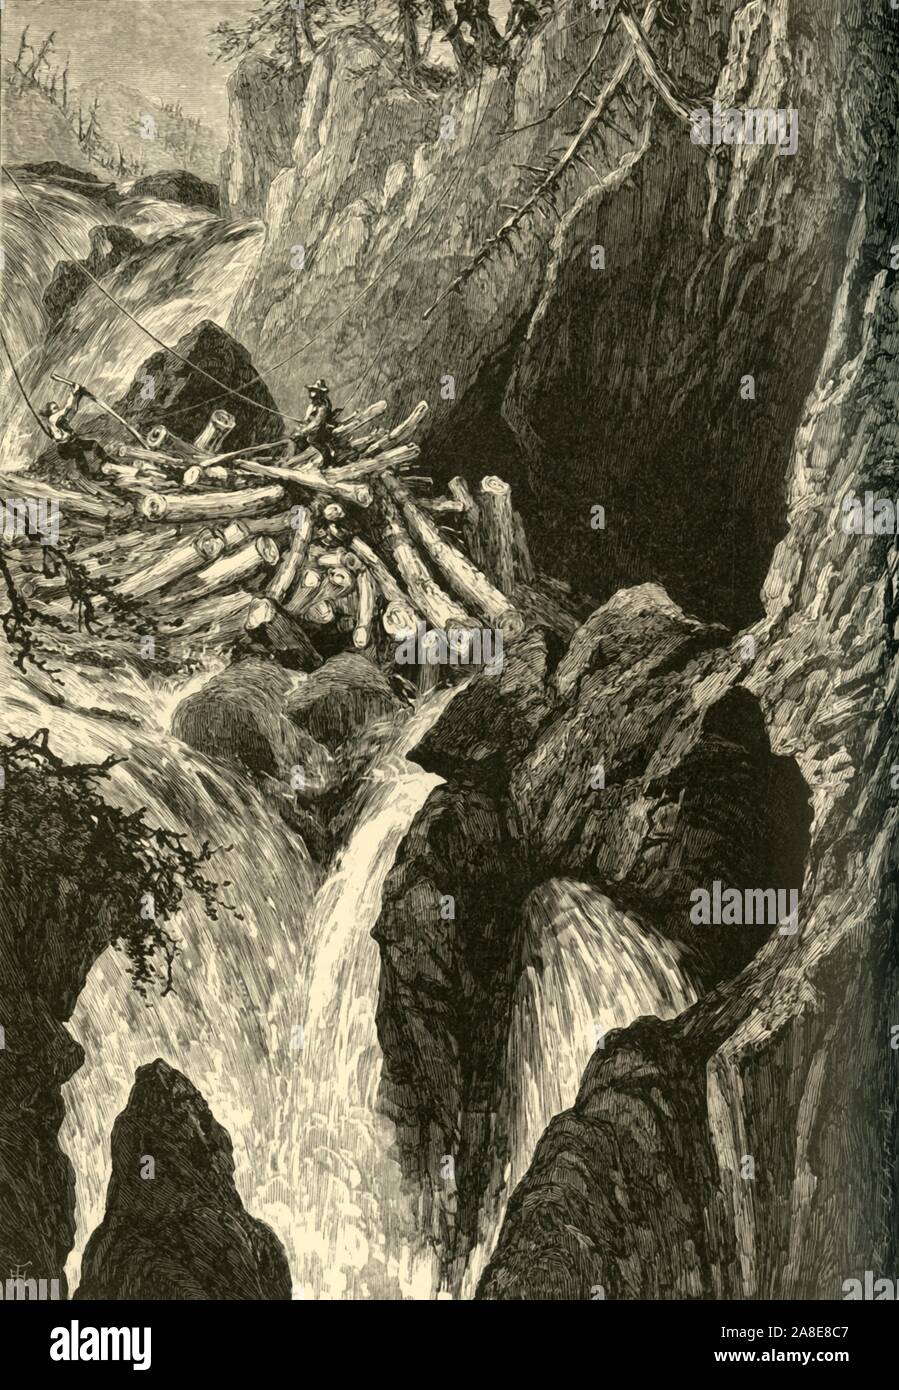 'Clearing a Jam, Great Falls of the Ausable', 1874. Loggers trying to shift cut tree trunks in the Ausable Chasm near Keeseville, New York State, USA. '...the Great Falls, one hundred and fifty feet high, surrounded by the wildest scenery. Below this the stream grows narrower and deeper, and rushes rapidly through the chasm, where, at the narrowest point, a wedged bowlder cramps the channel to the width of five or six feet. From the main stream branches run at right angles through fissures, down one of which, between almost perpendicular rocks a hundred feet high, hangs an equally steep stairw Stock Photo